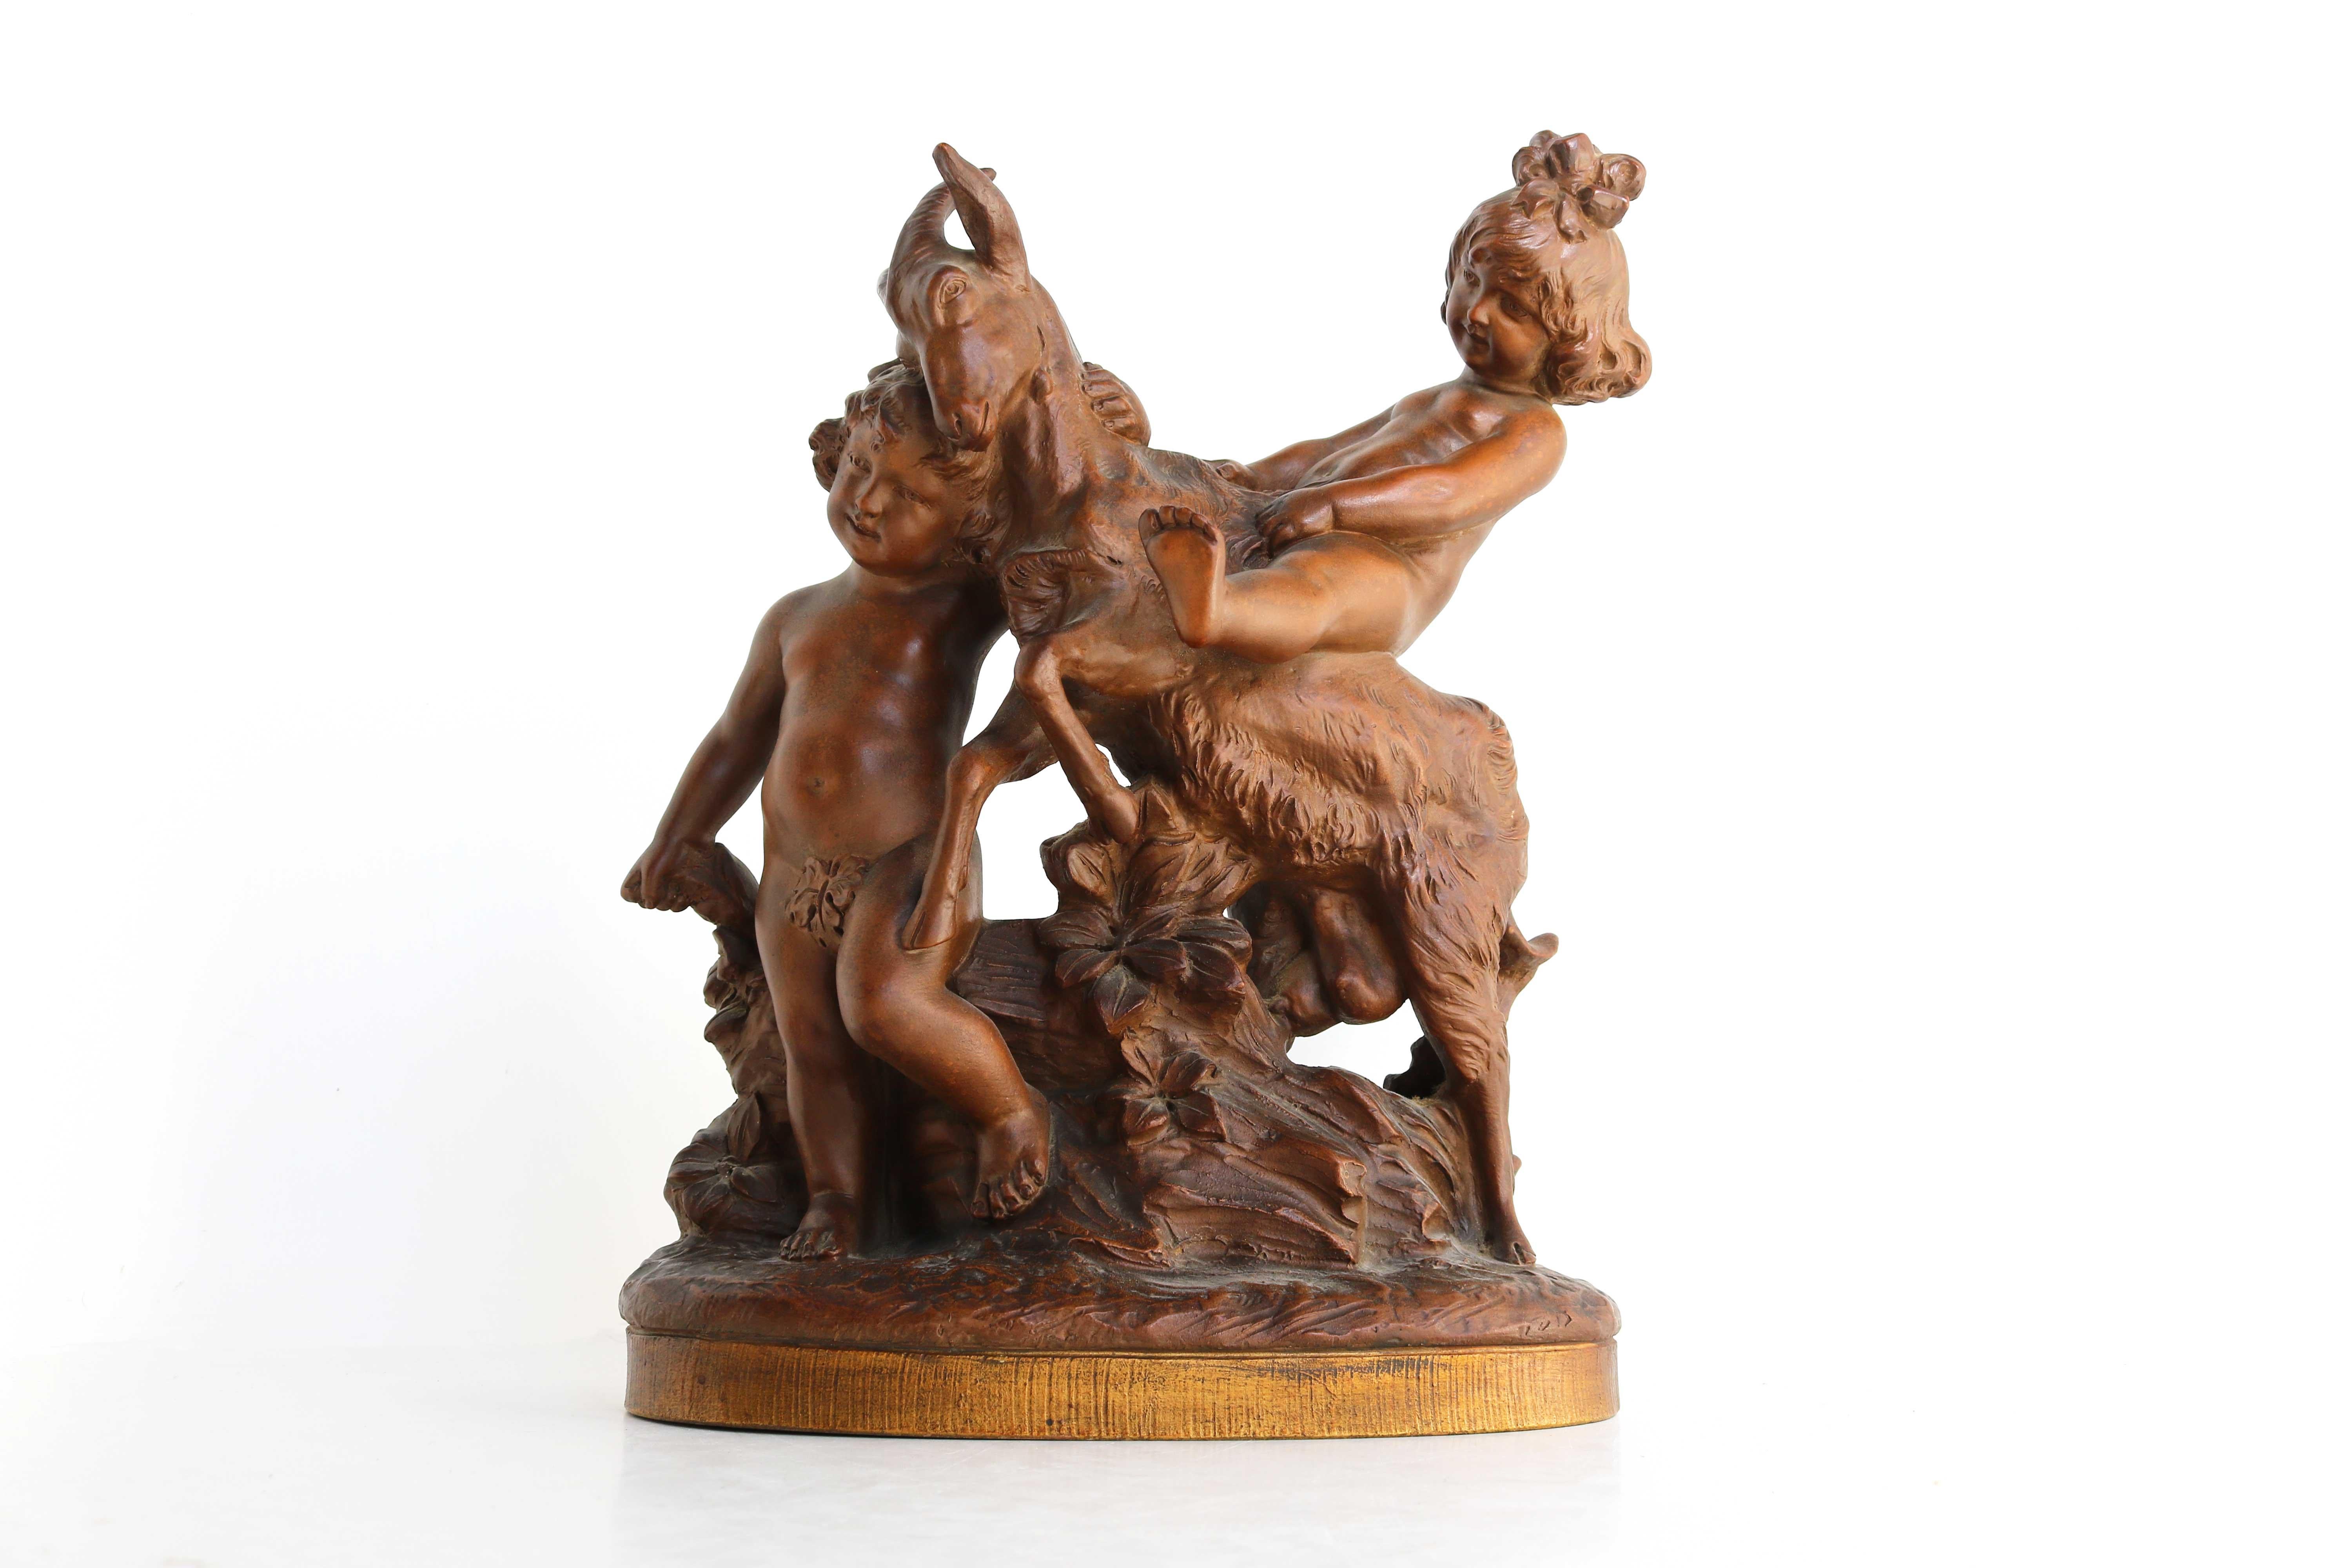 Terra Cotta Group Boy And Girl Playing With A Goat After Pietro Balestra 1900s
Late 19th century beautifully detailed statue in terracotta of a boy and a girl playing with a goat placed on an oval, delicately gilded base, decorated with grooves.